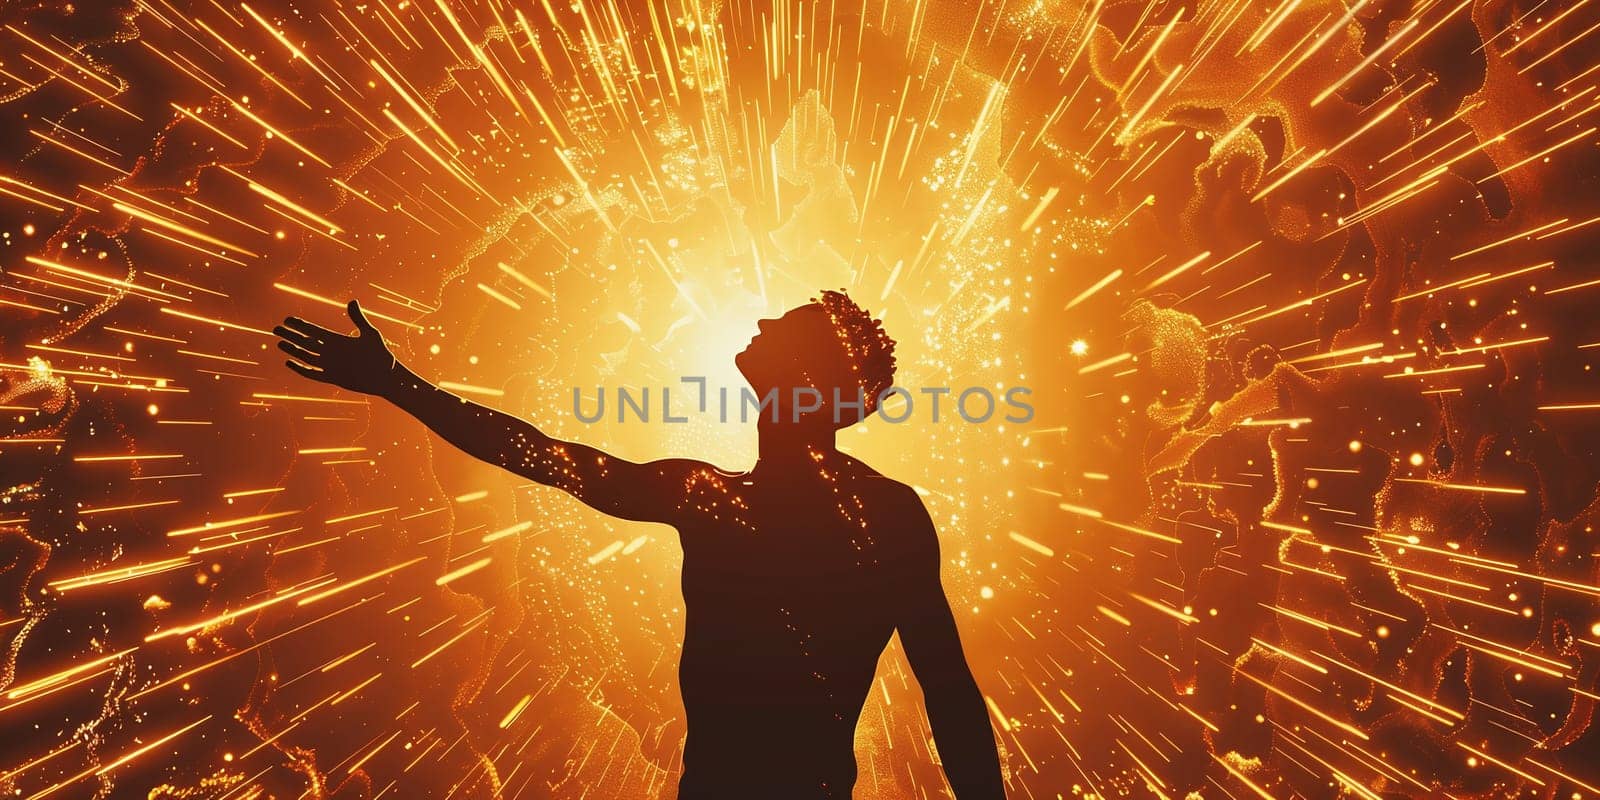 Man holding arms up in praise against a sunburst. High quality photo